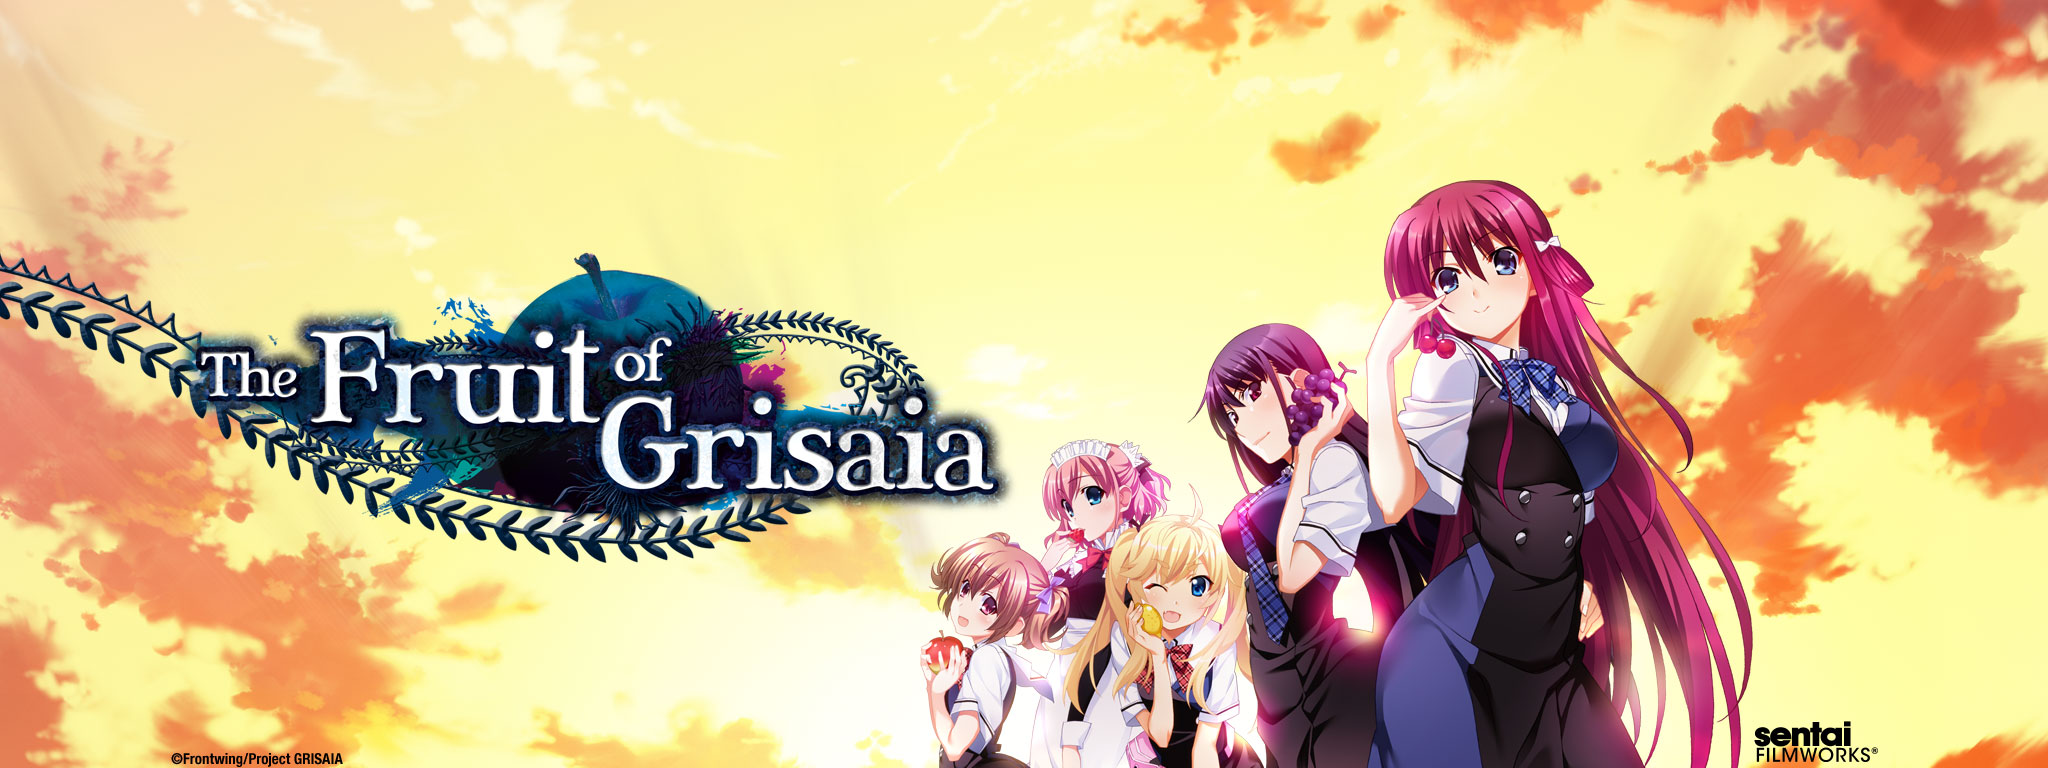 Title Art for The Fruit of Grisaia